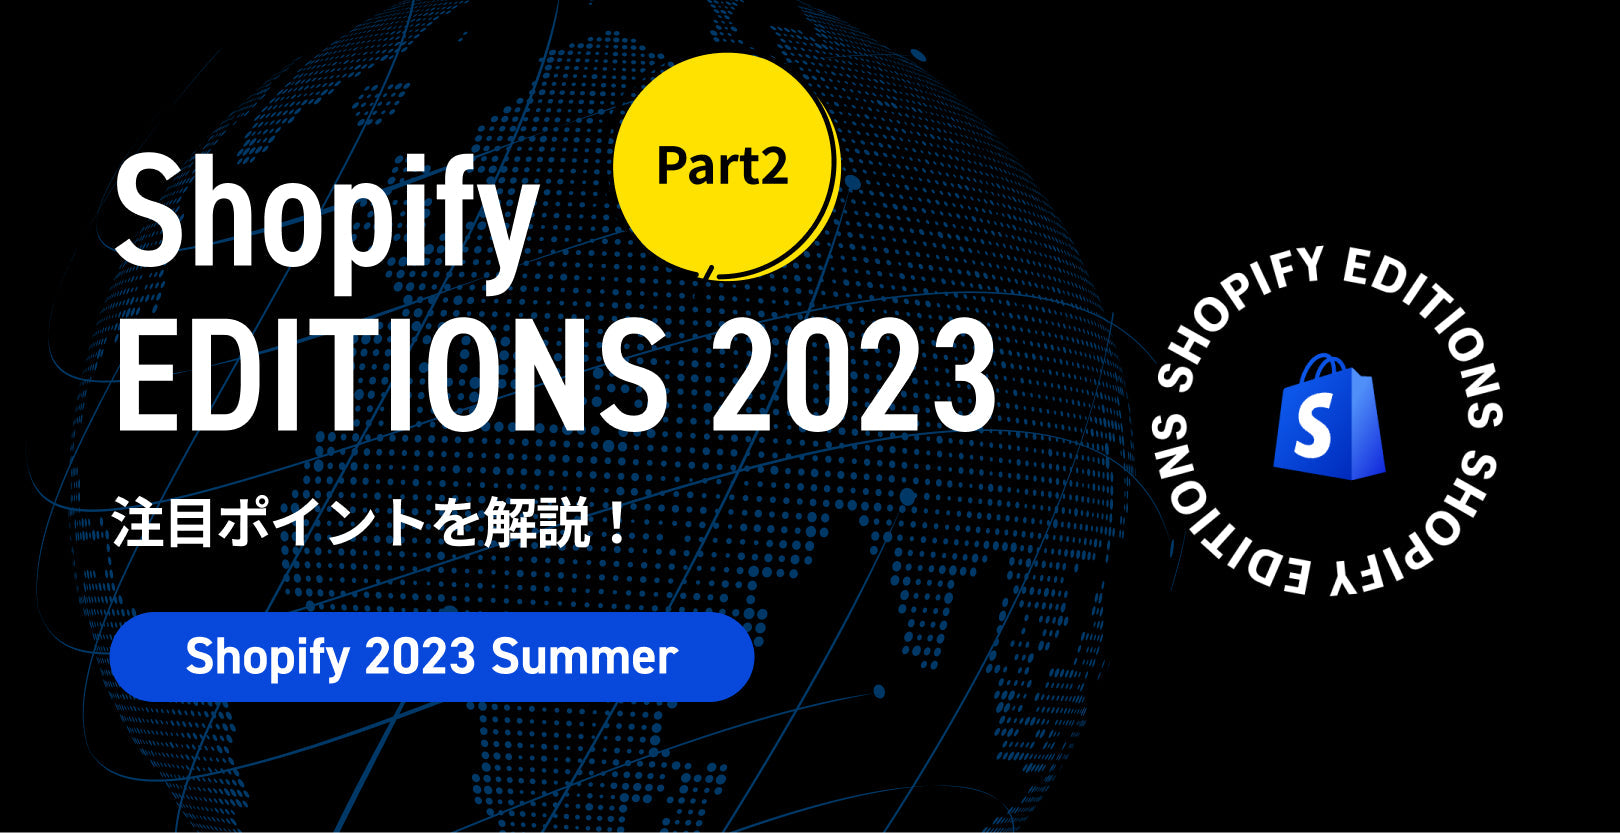 What are the new features announced in SHOPIFY EDITIONS SUMMER 2023? Introducing the hot update!